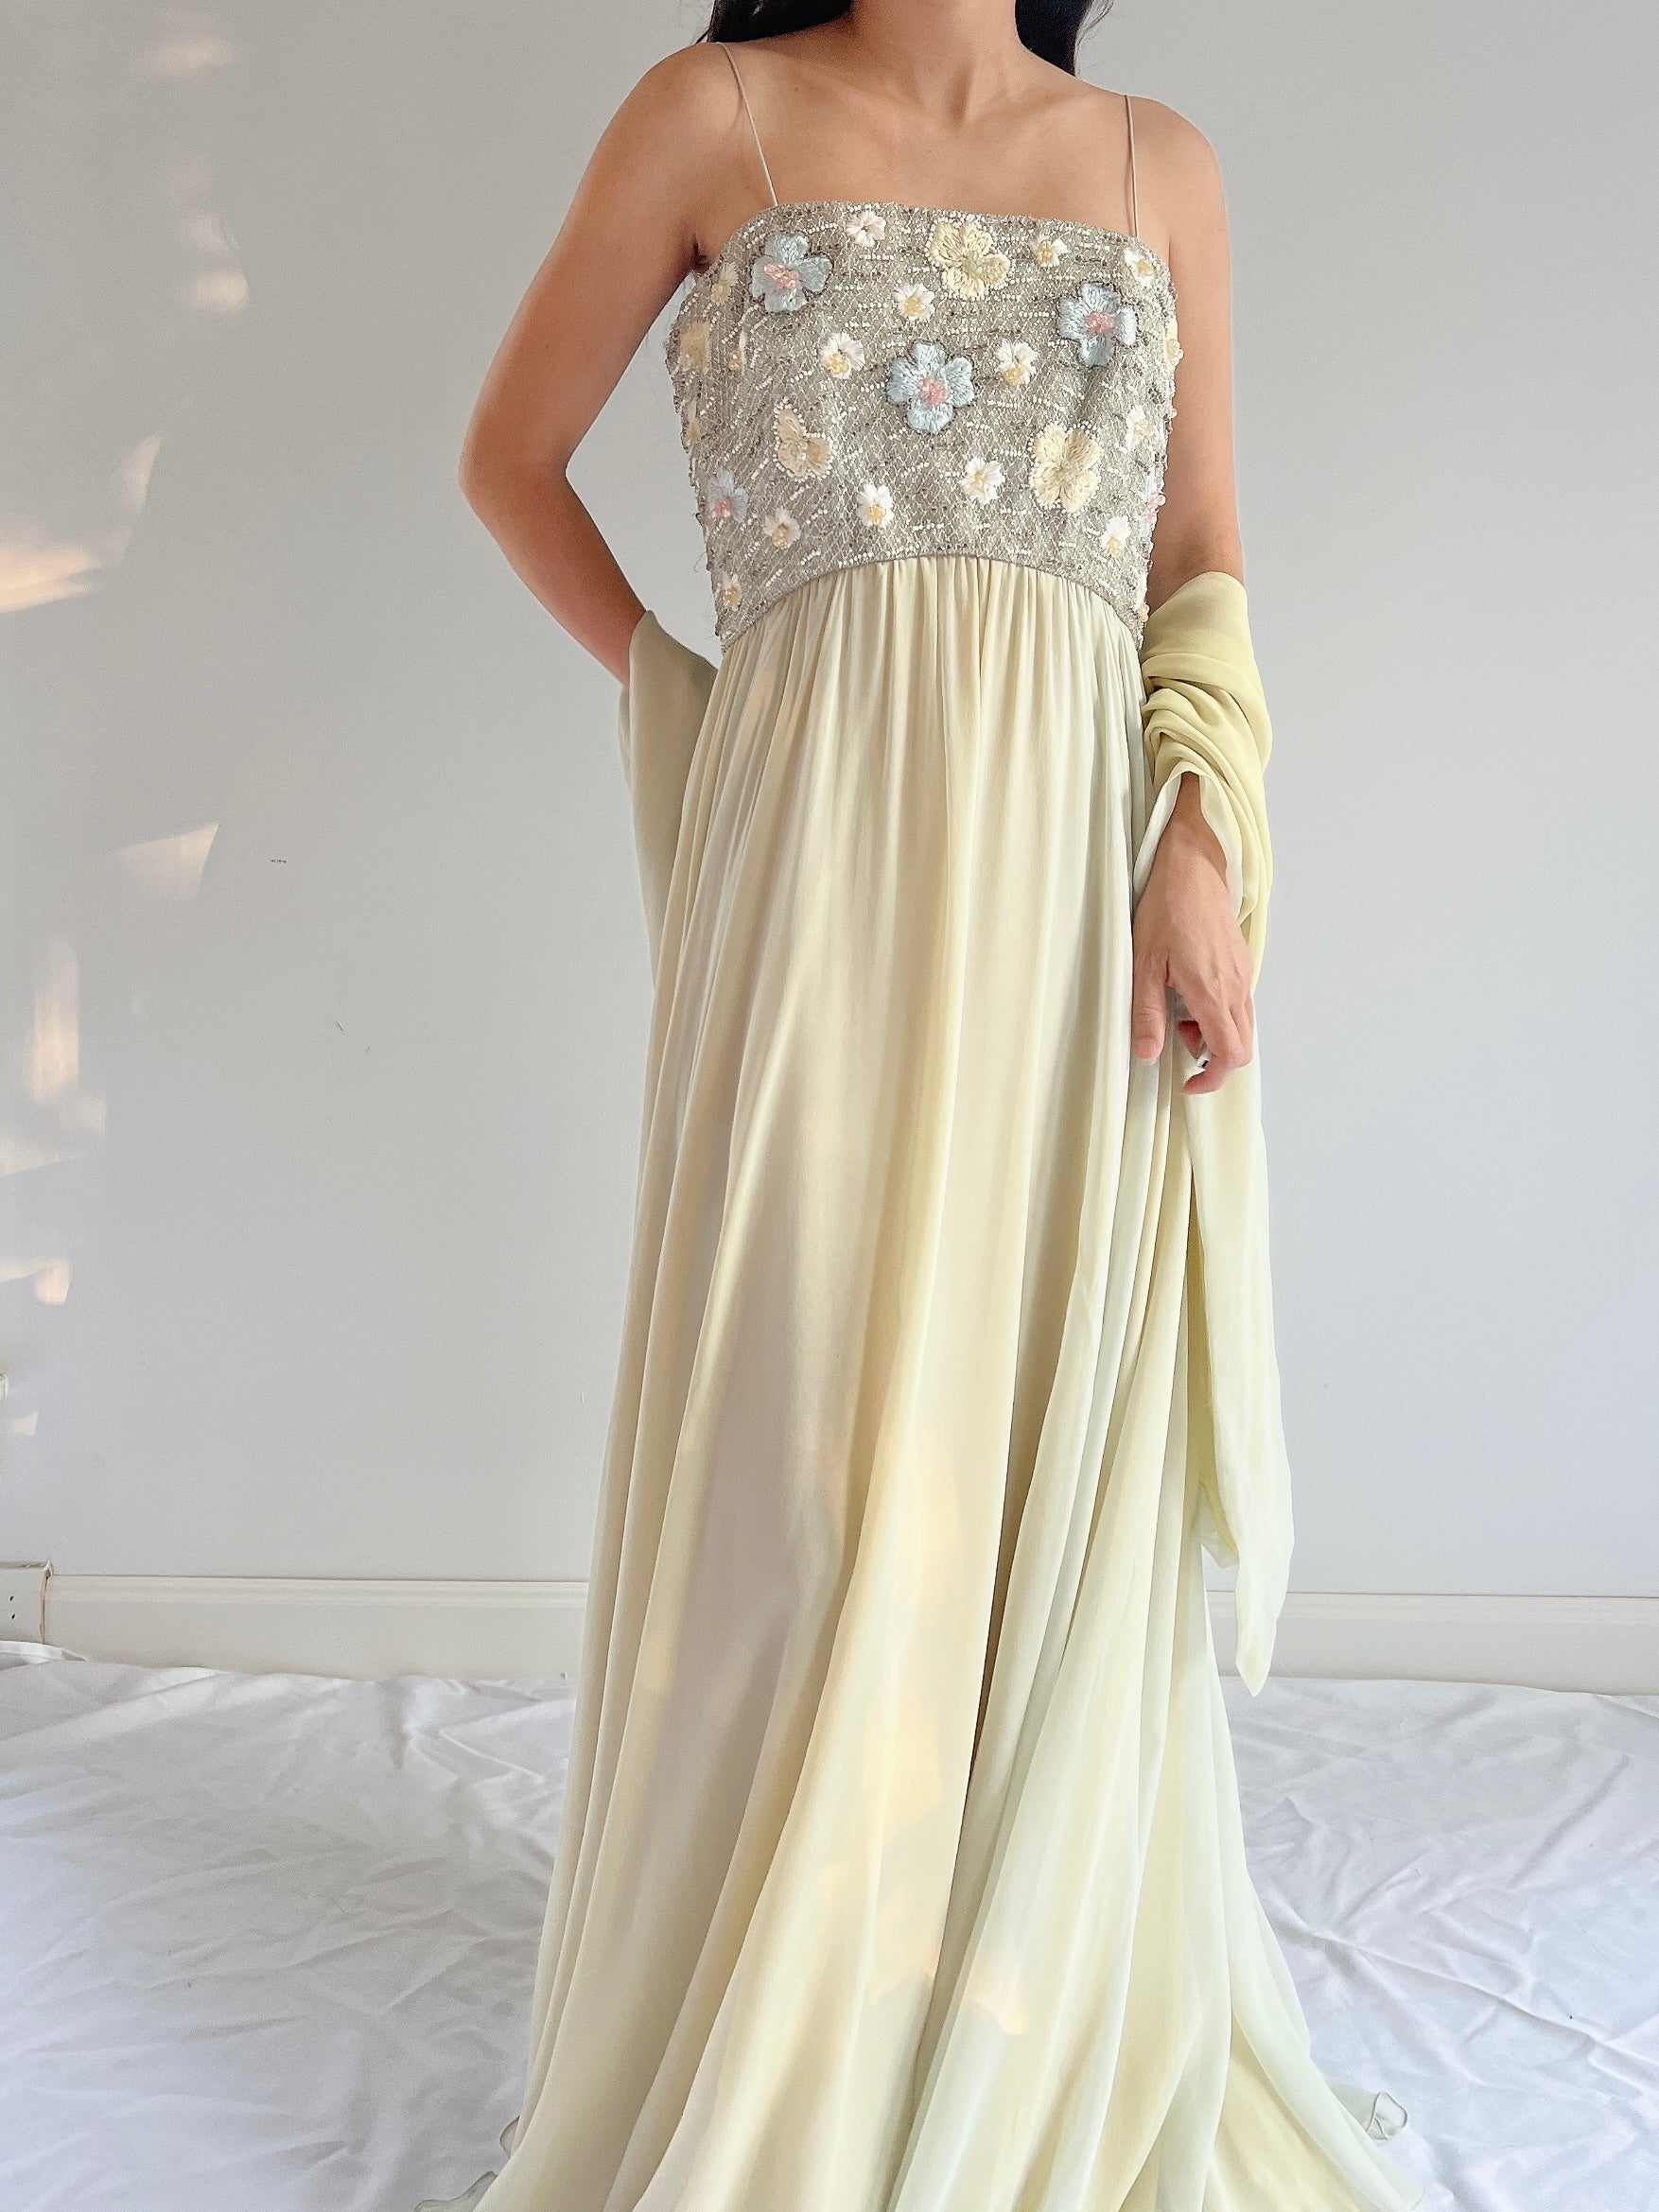 1960s Malcolm Starr Silk Beaded Gown - M